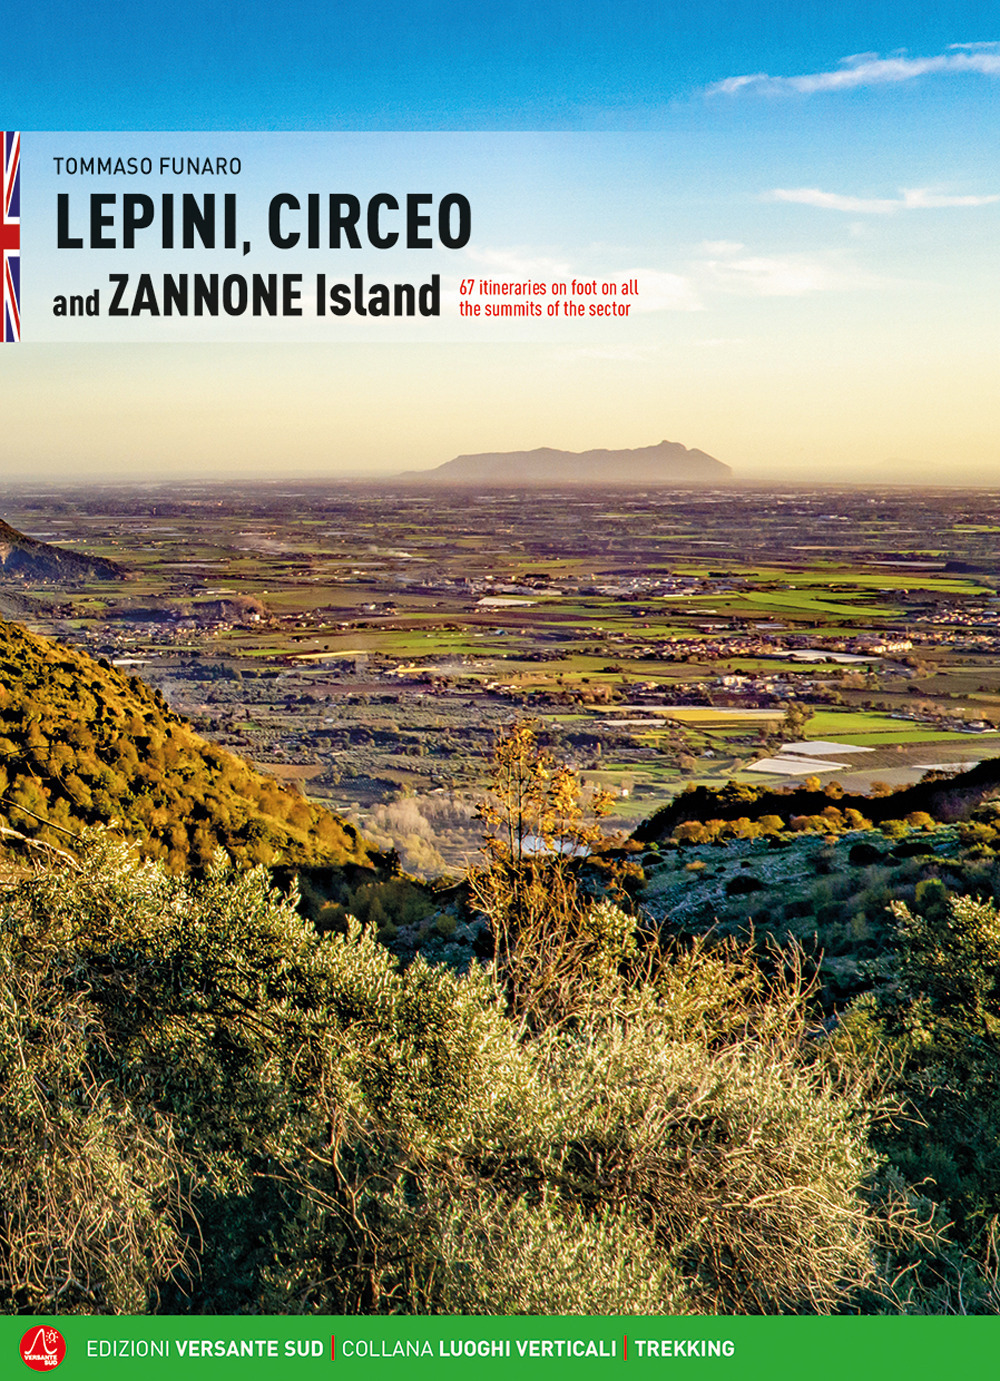 Lepini, Circeo and Zannone Island. 67 itineraries on foot on all the summits of the sector